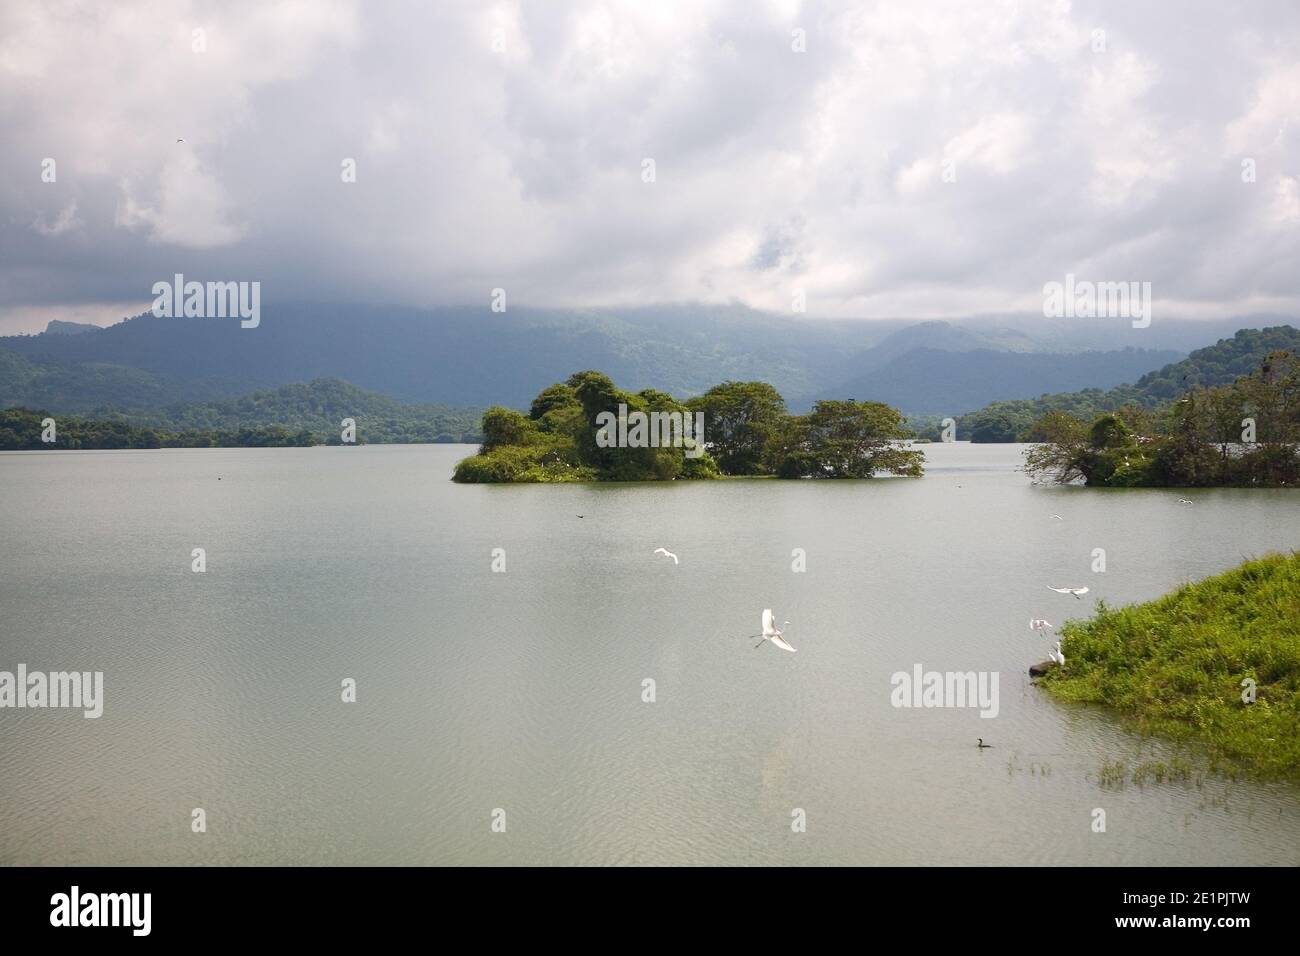 Great white herons fly over the lake. The nature of Sri Lanka. Stock Photo